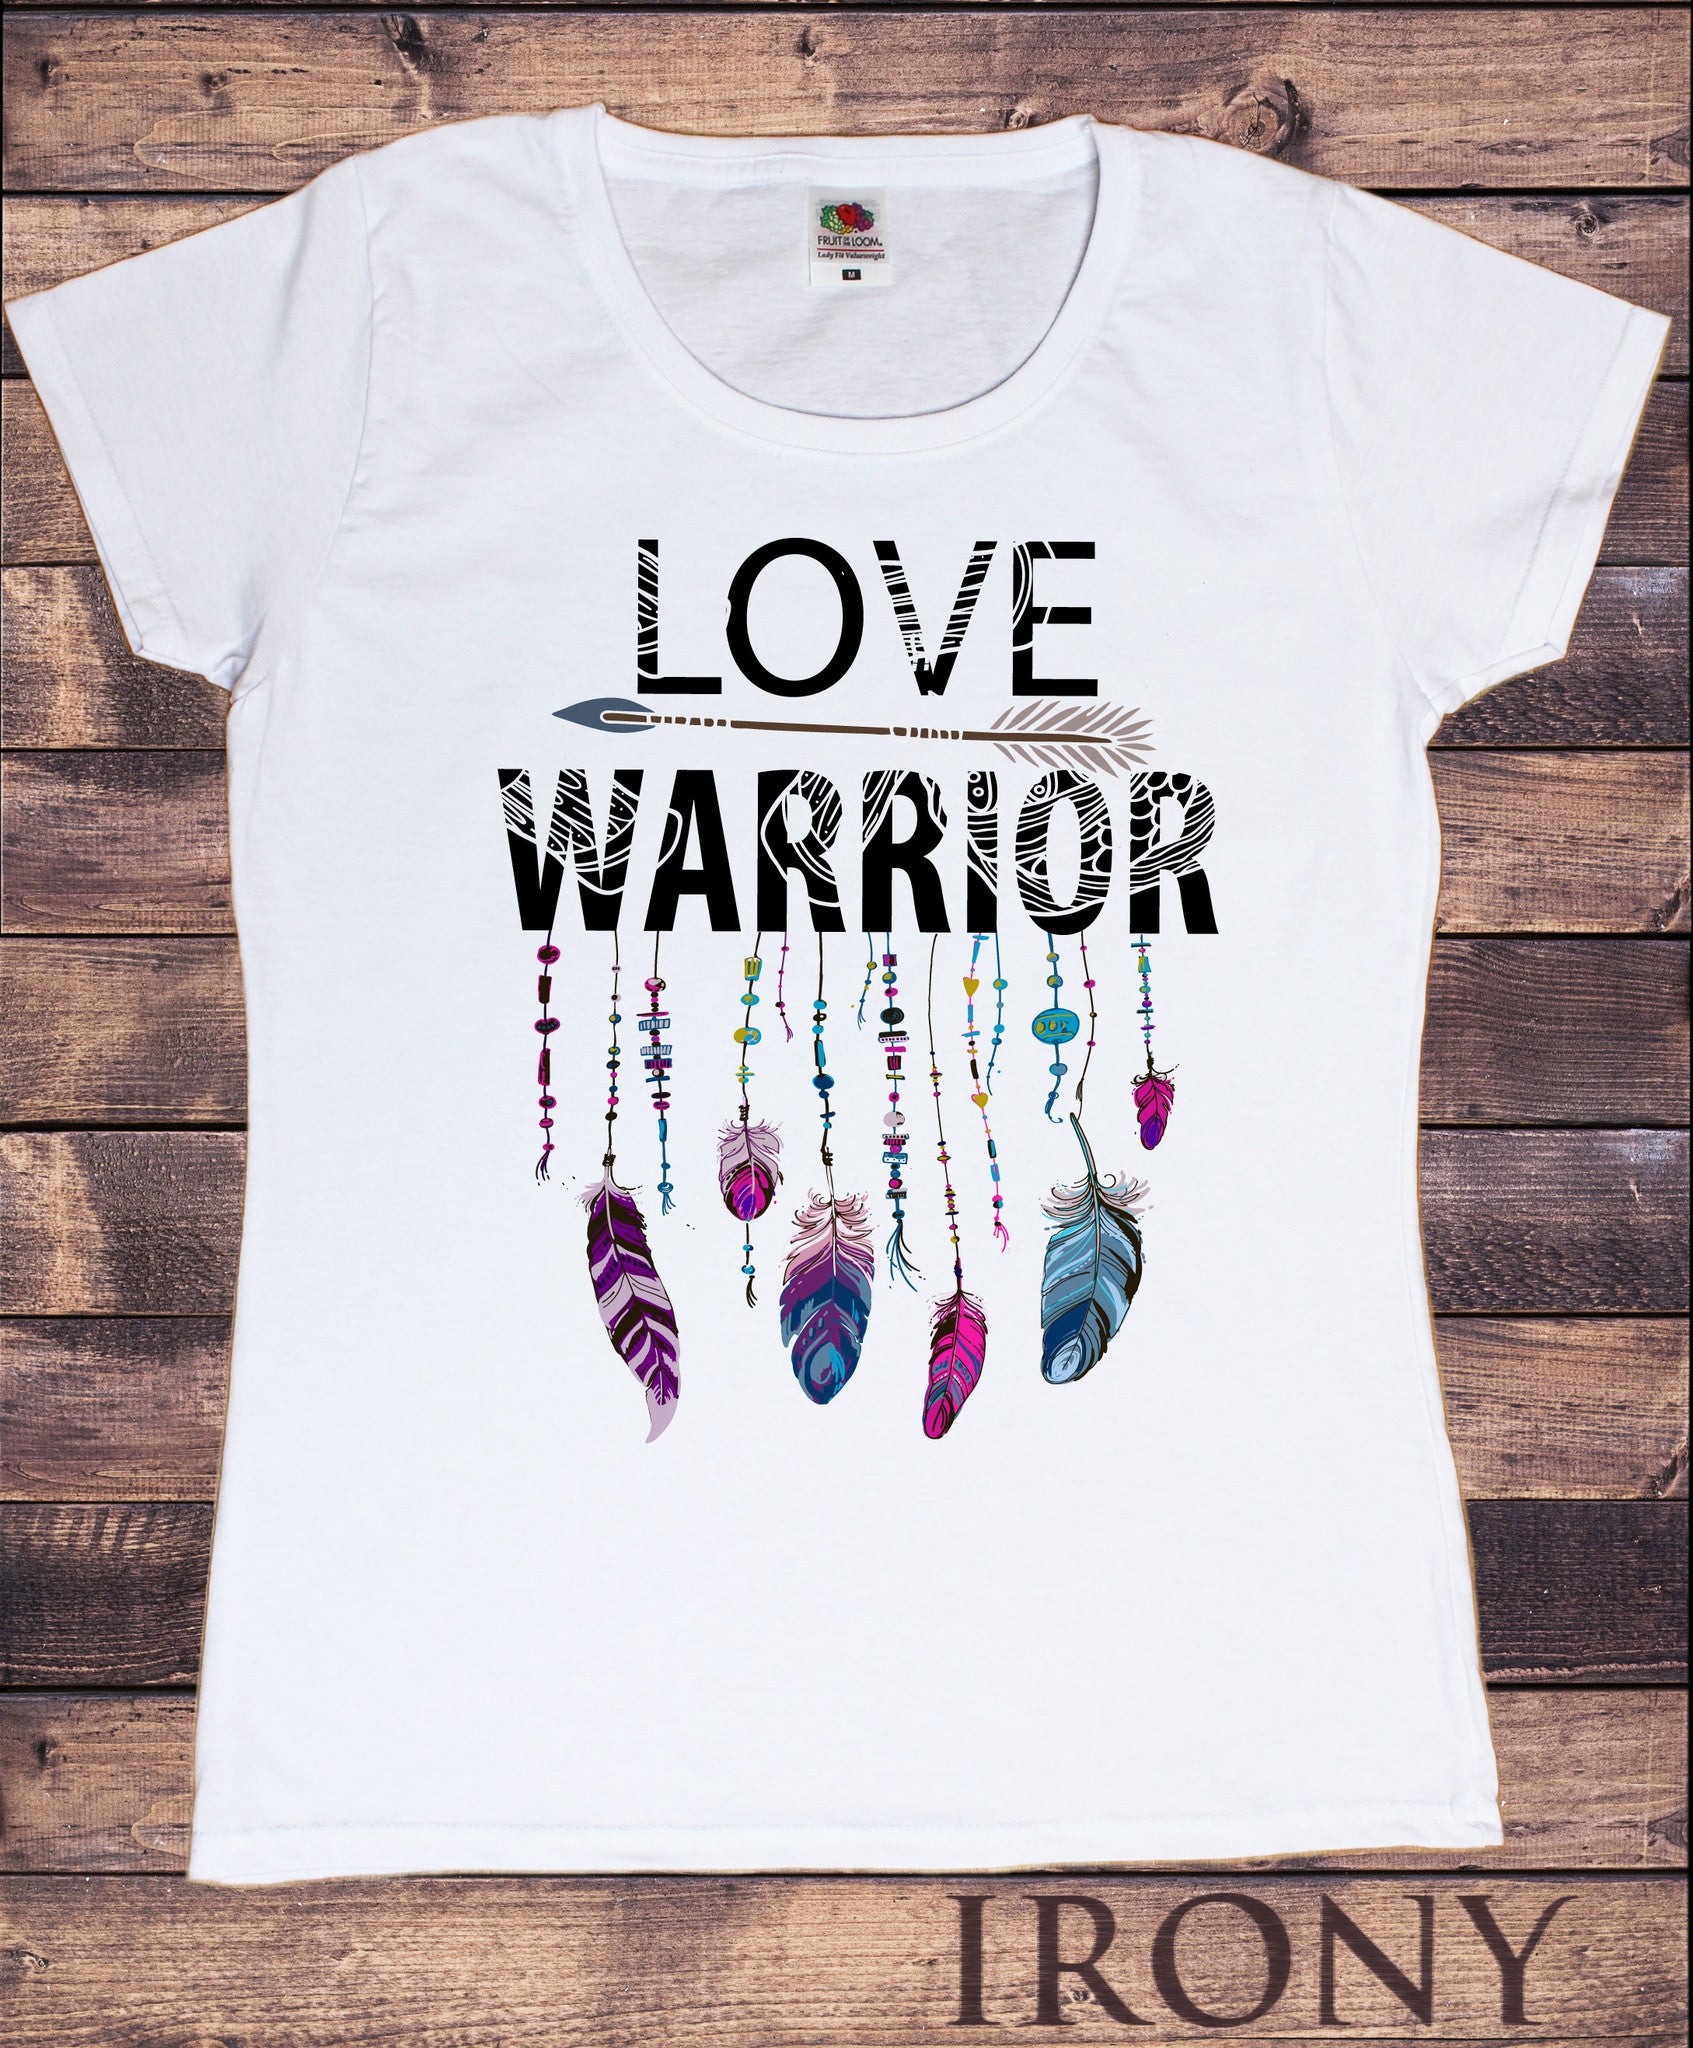 Women's T-Shirt Love Warrior feathers and arrow Design-Strings Print TS728